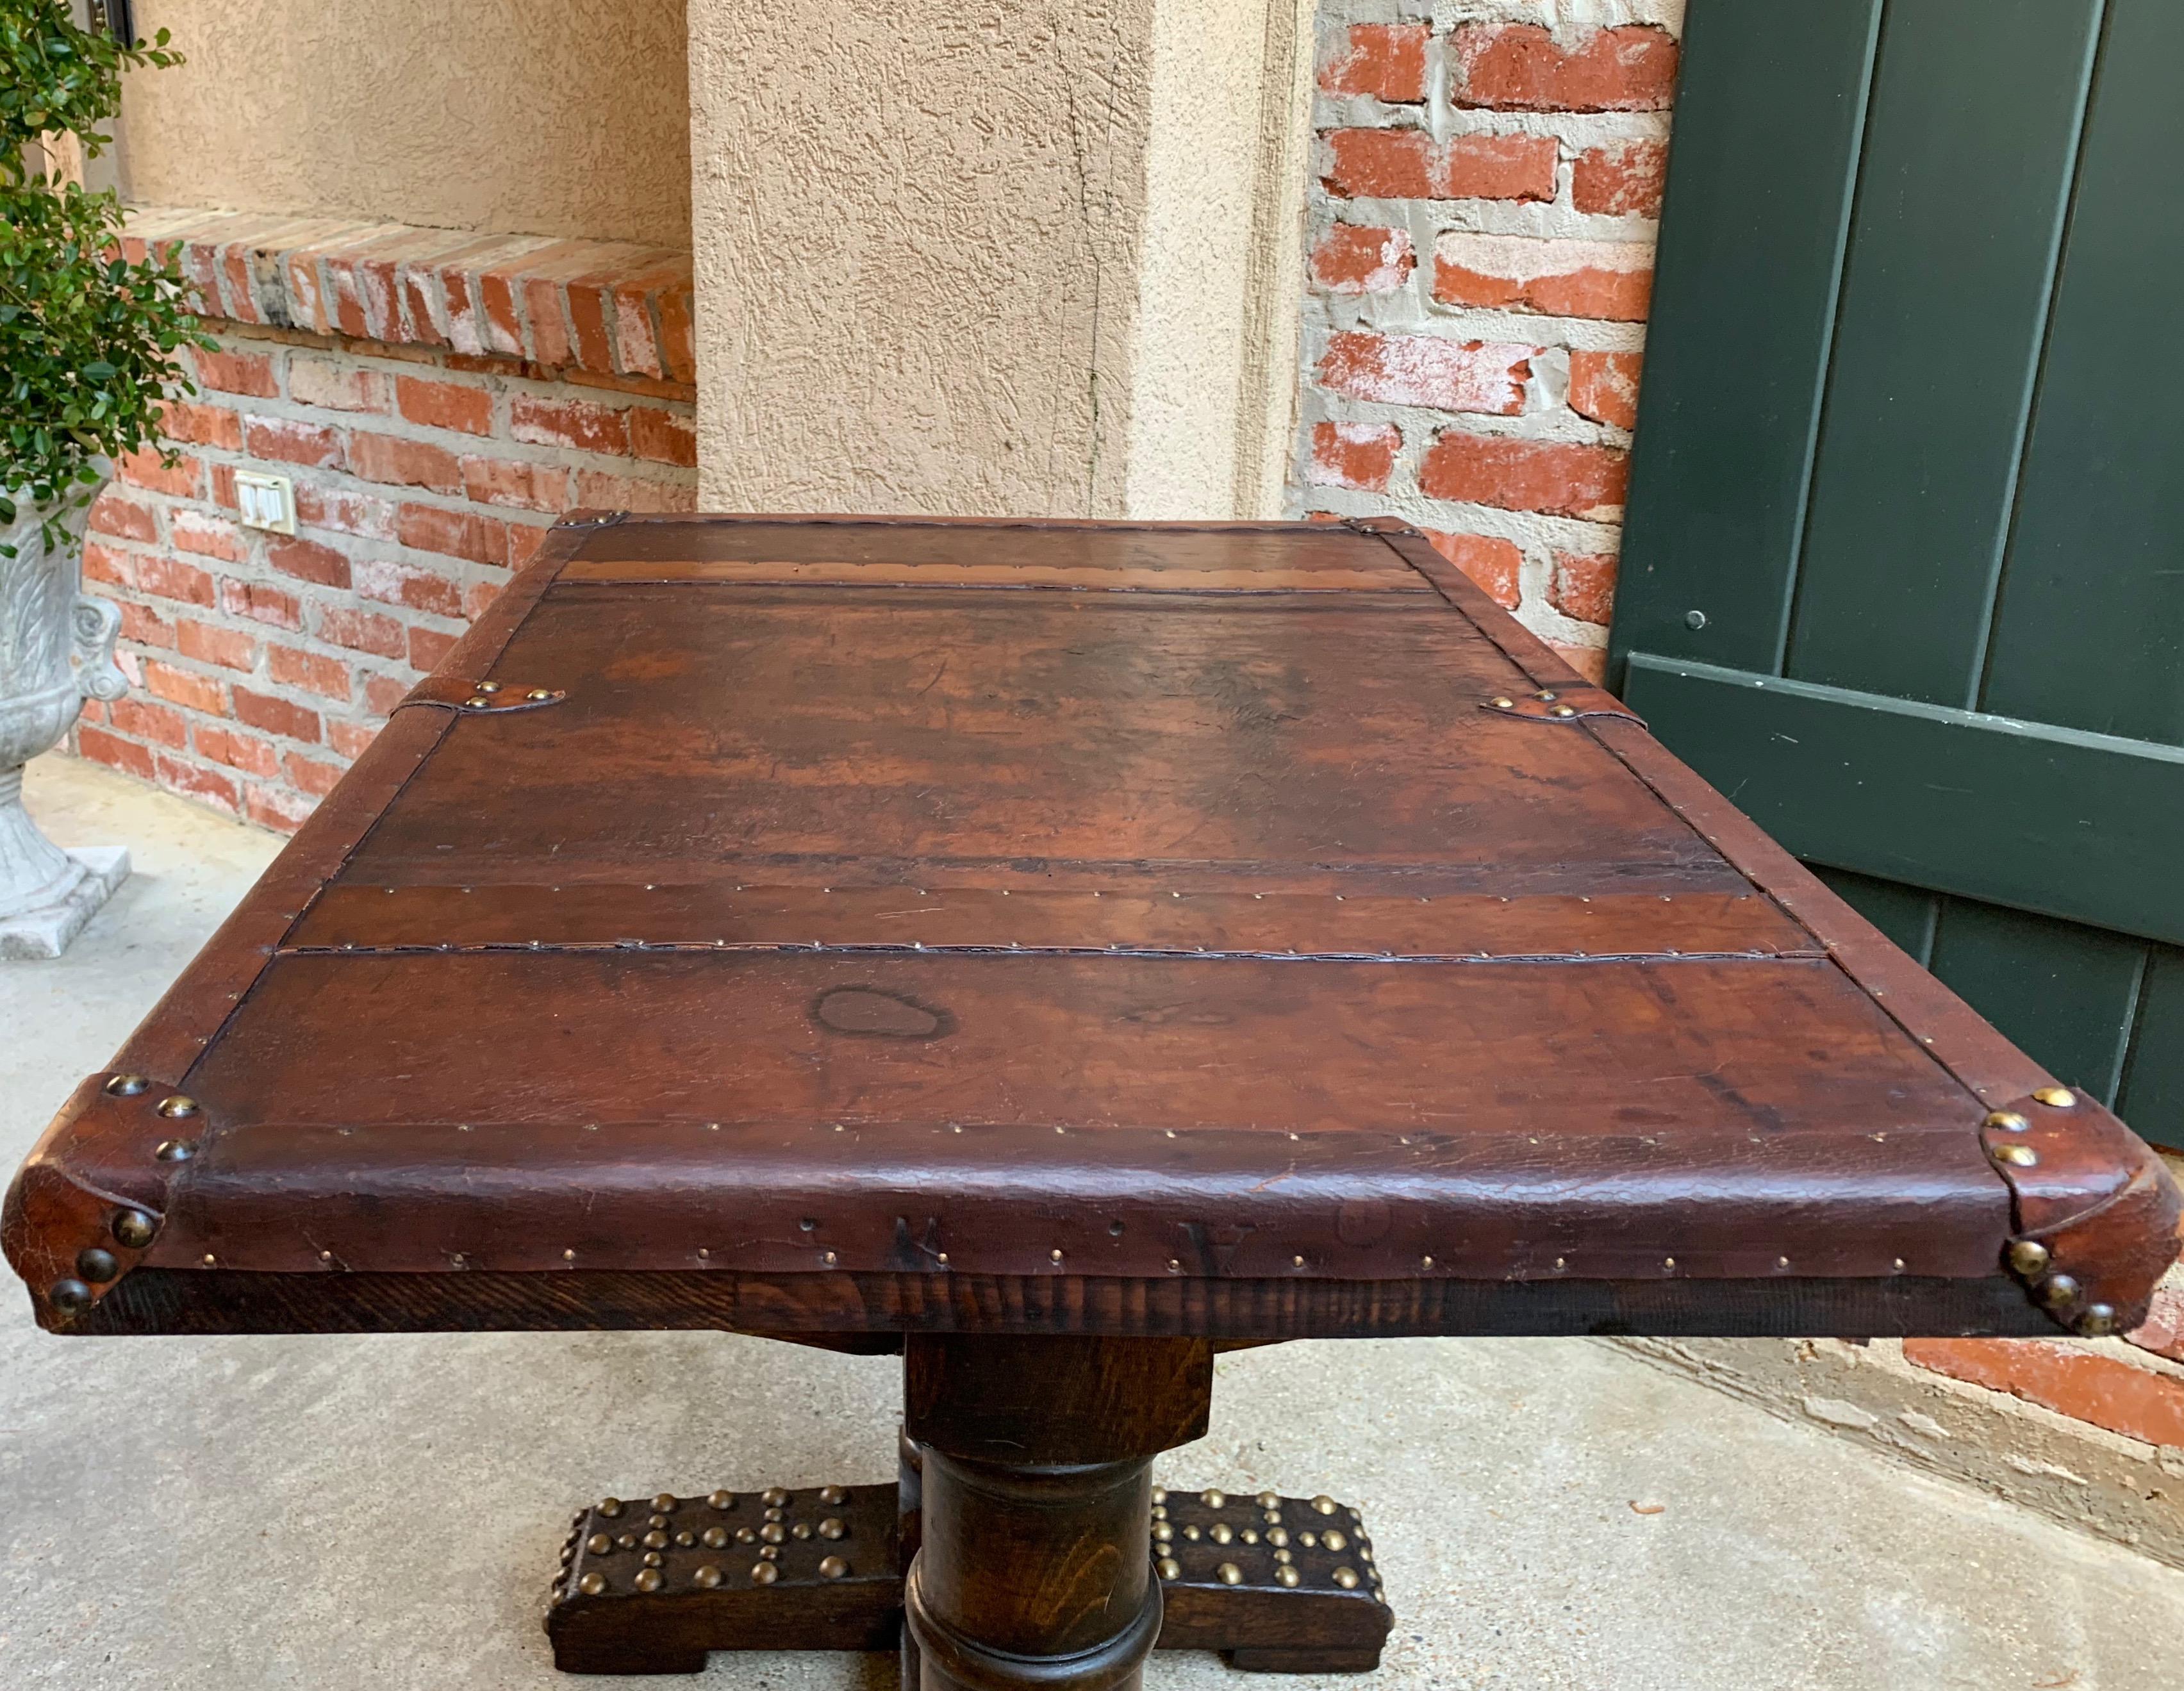 Direct from England, a charming antique English oak table or desk with aged leather top!~
~Gorgeous leather with brass tacks, and larger brass tacks on the wide plank feet~
~English thick turned legs with trestle style plank cross